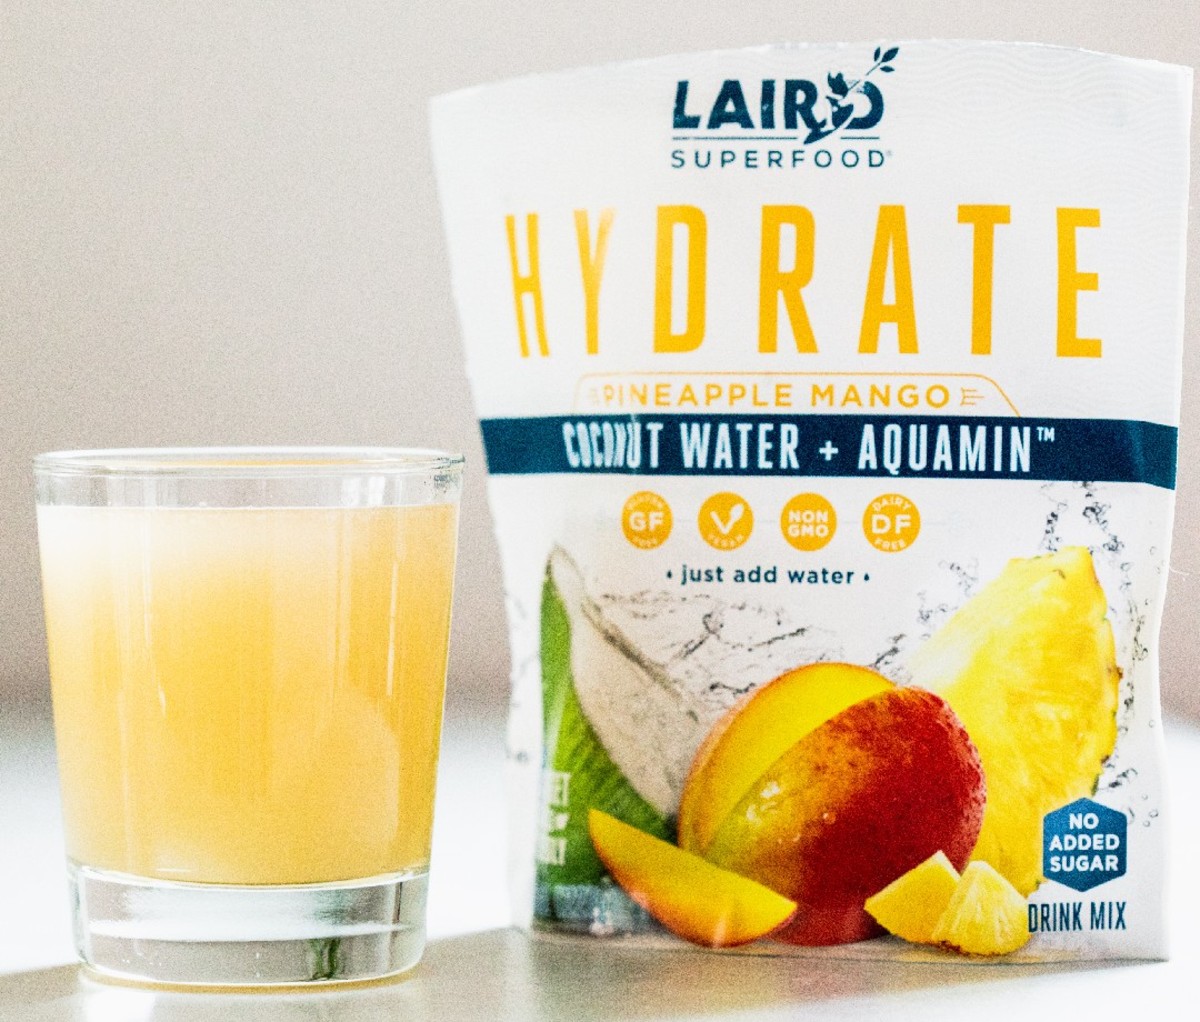 Packet of pineapple-mango flavored Laird HYDRATE powder next to a full glass of it